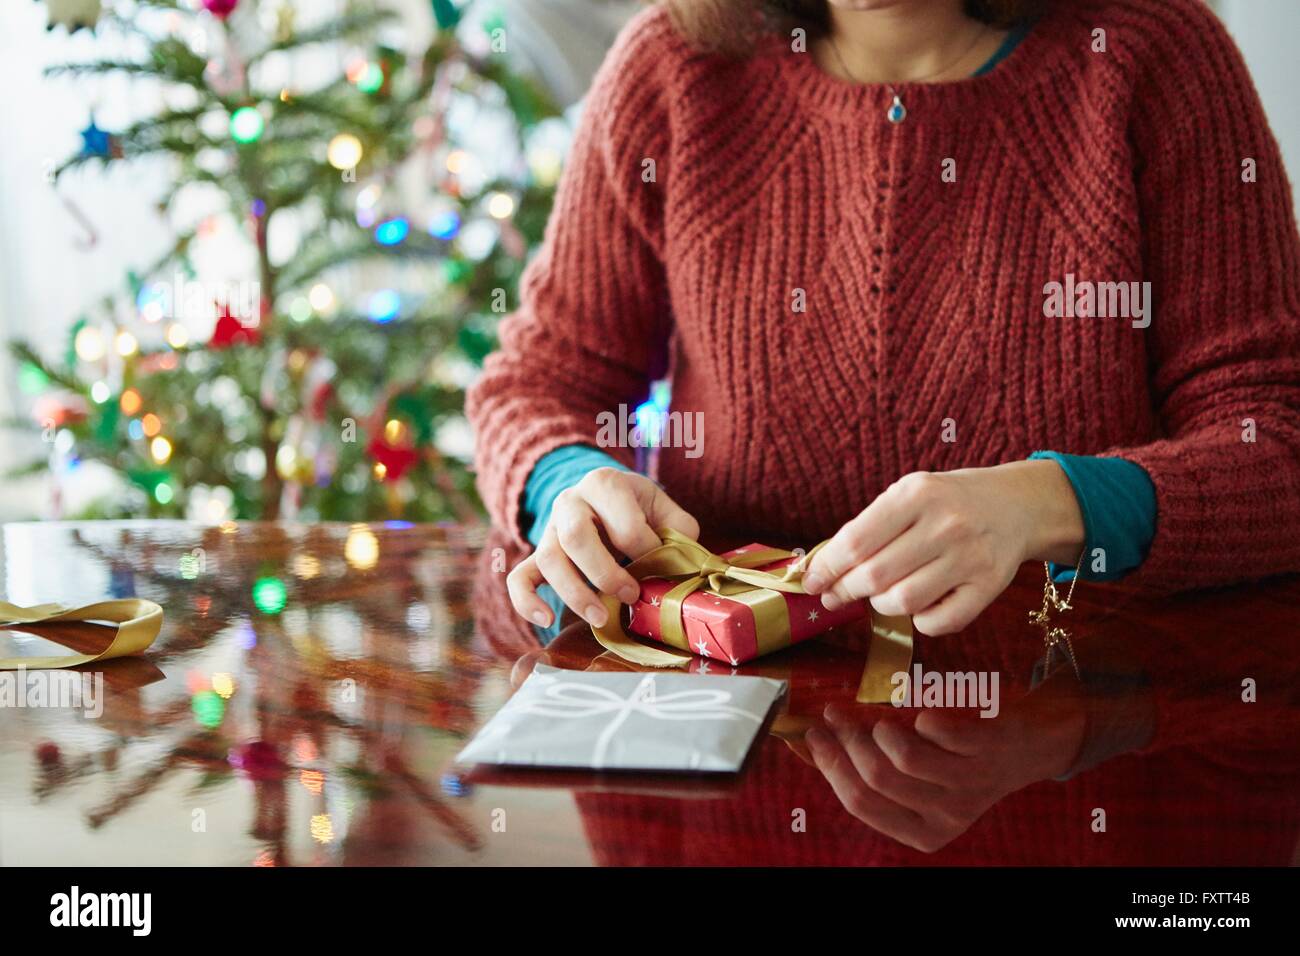 Cropped shot of woman wrapping xmas gift at table Stock Photo